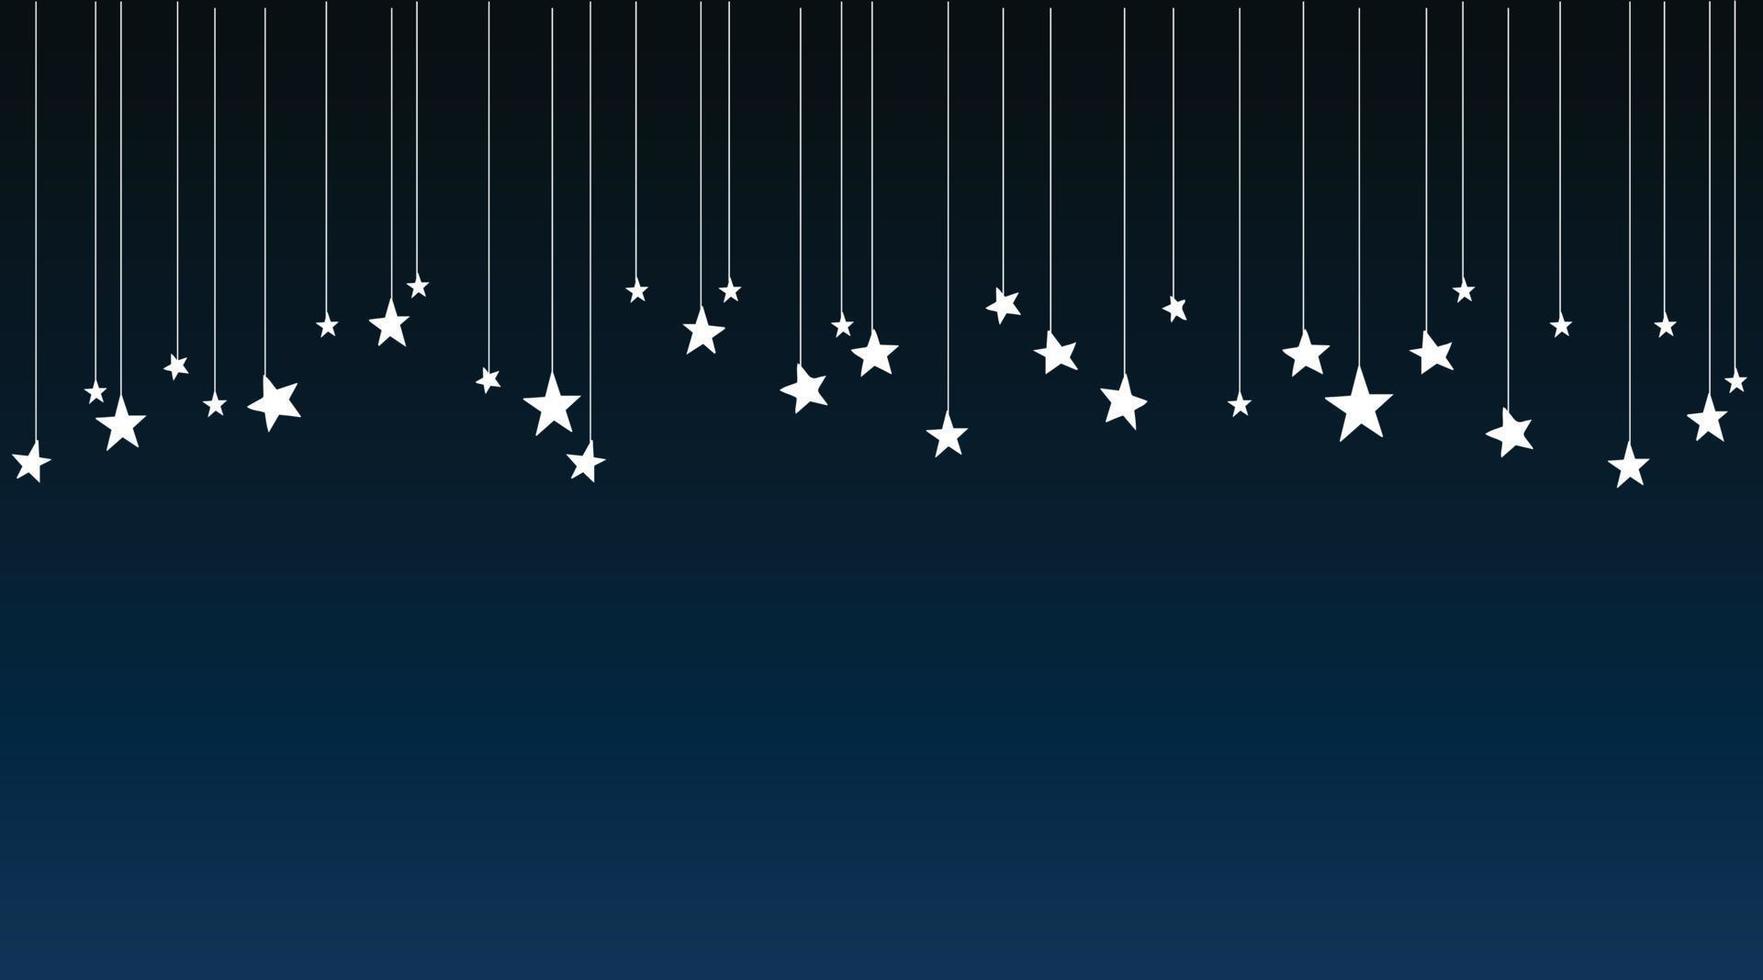 Plain blue background with hanging stars vector